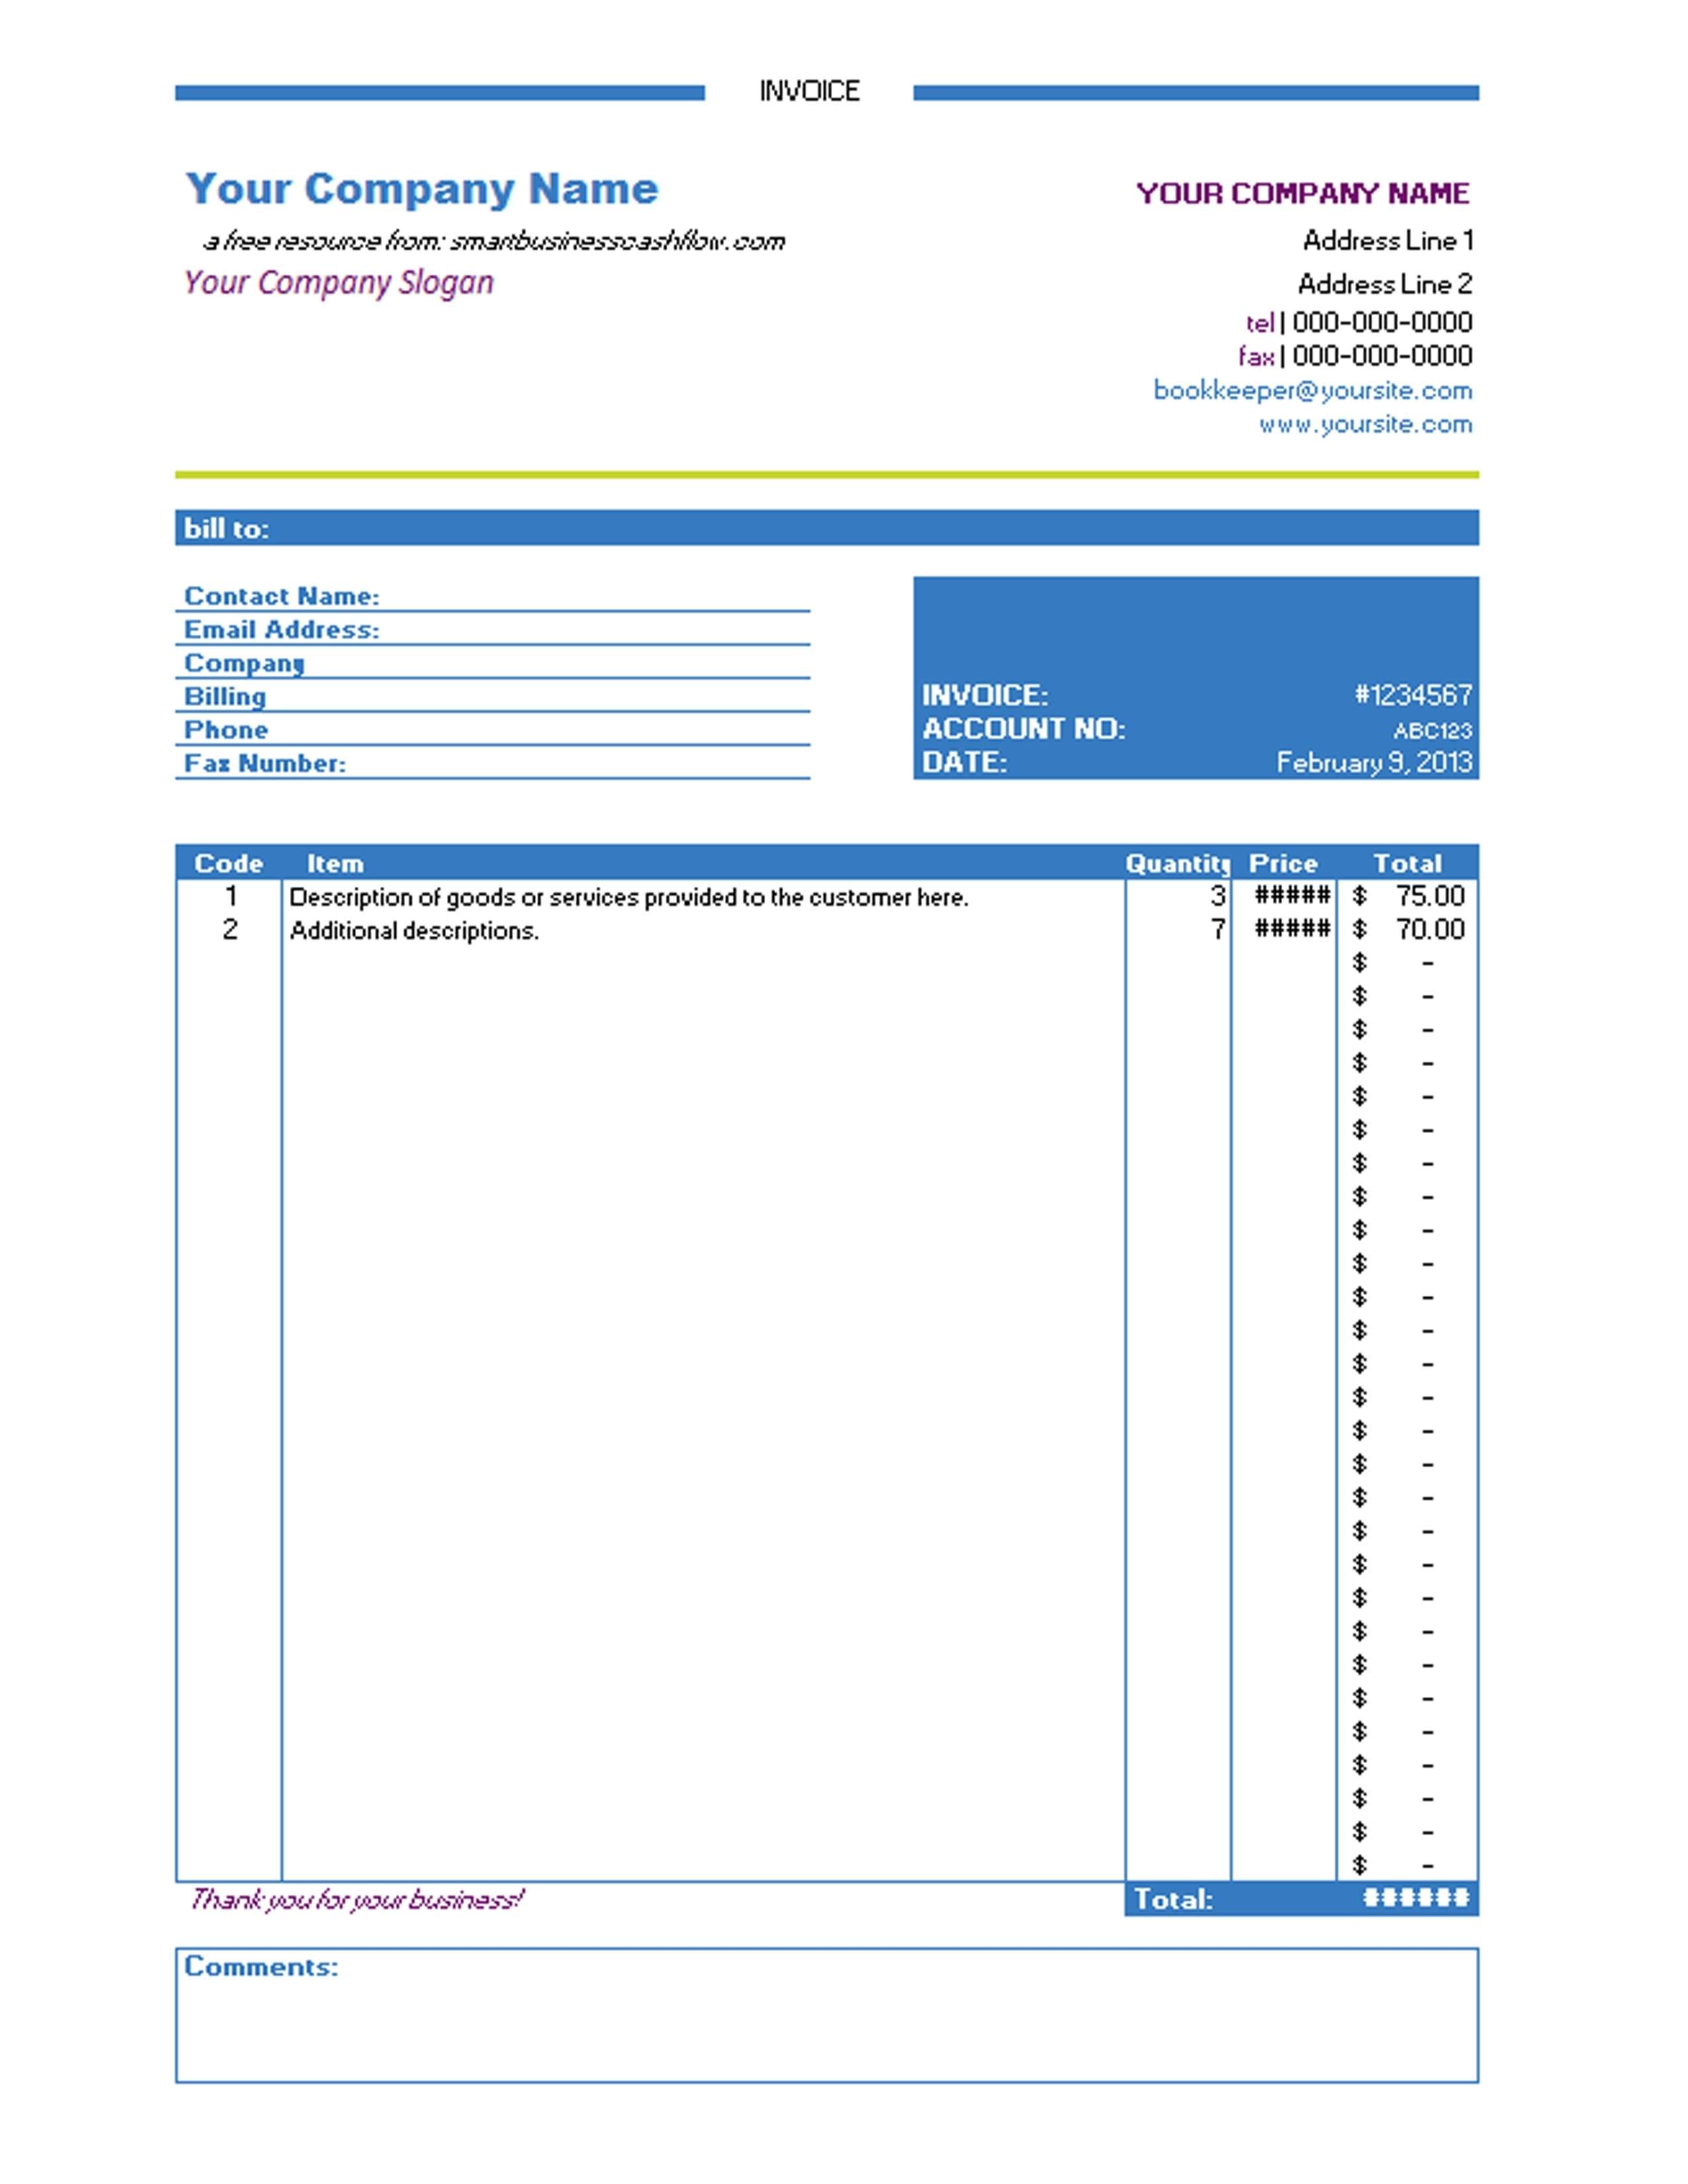 Invoice Excel Download * Invoice Template Ideas